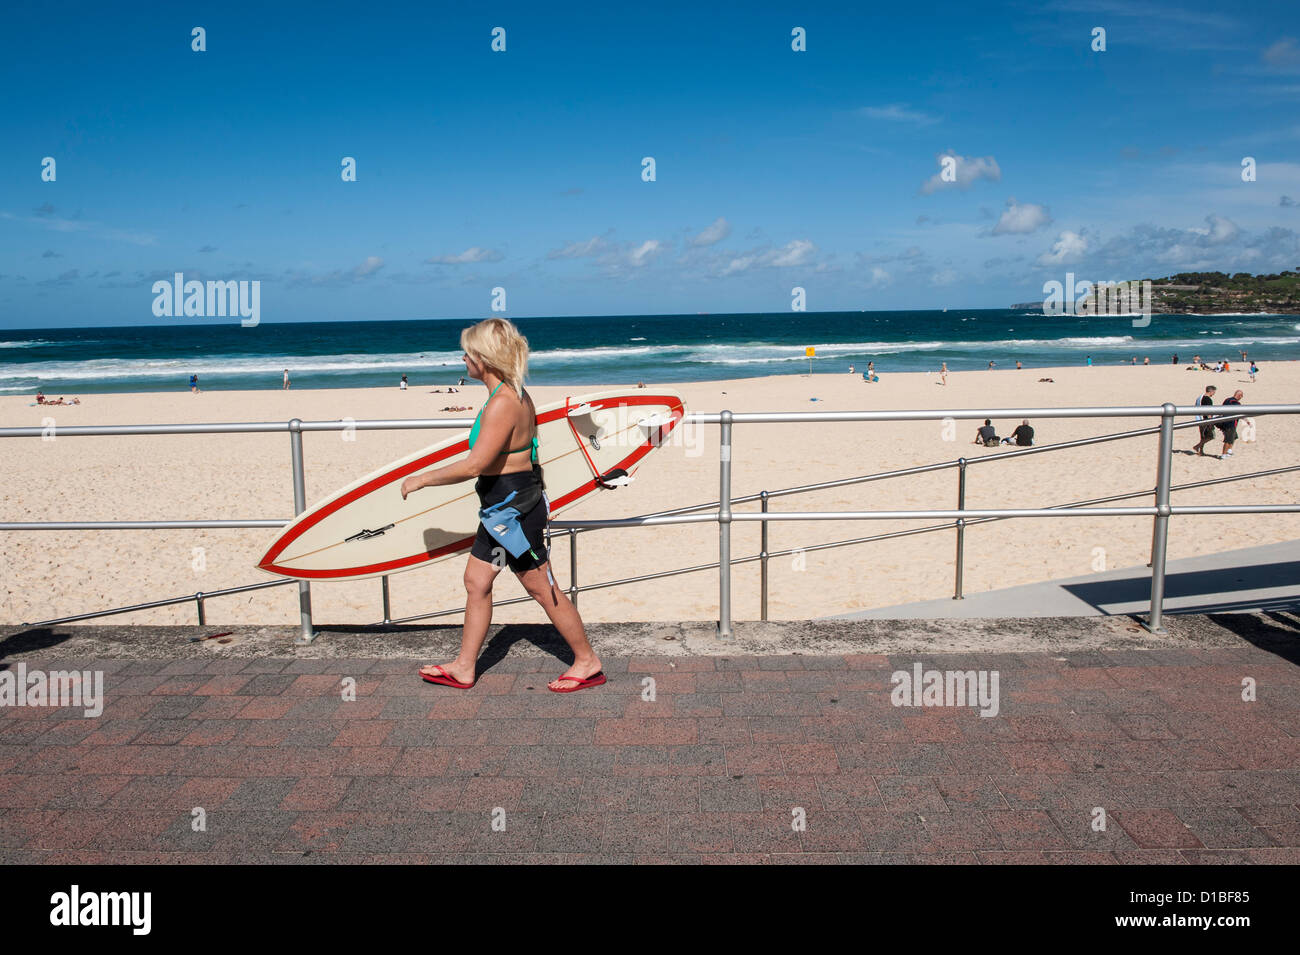 Bondi Beach is a world famous surfing beach and mostly full of surfers, swimmers, foreign tourists and even yoga practitioners. Stock Photo